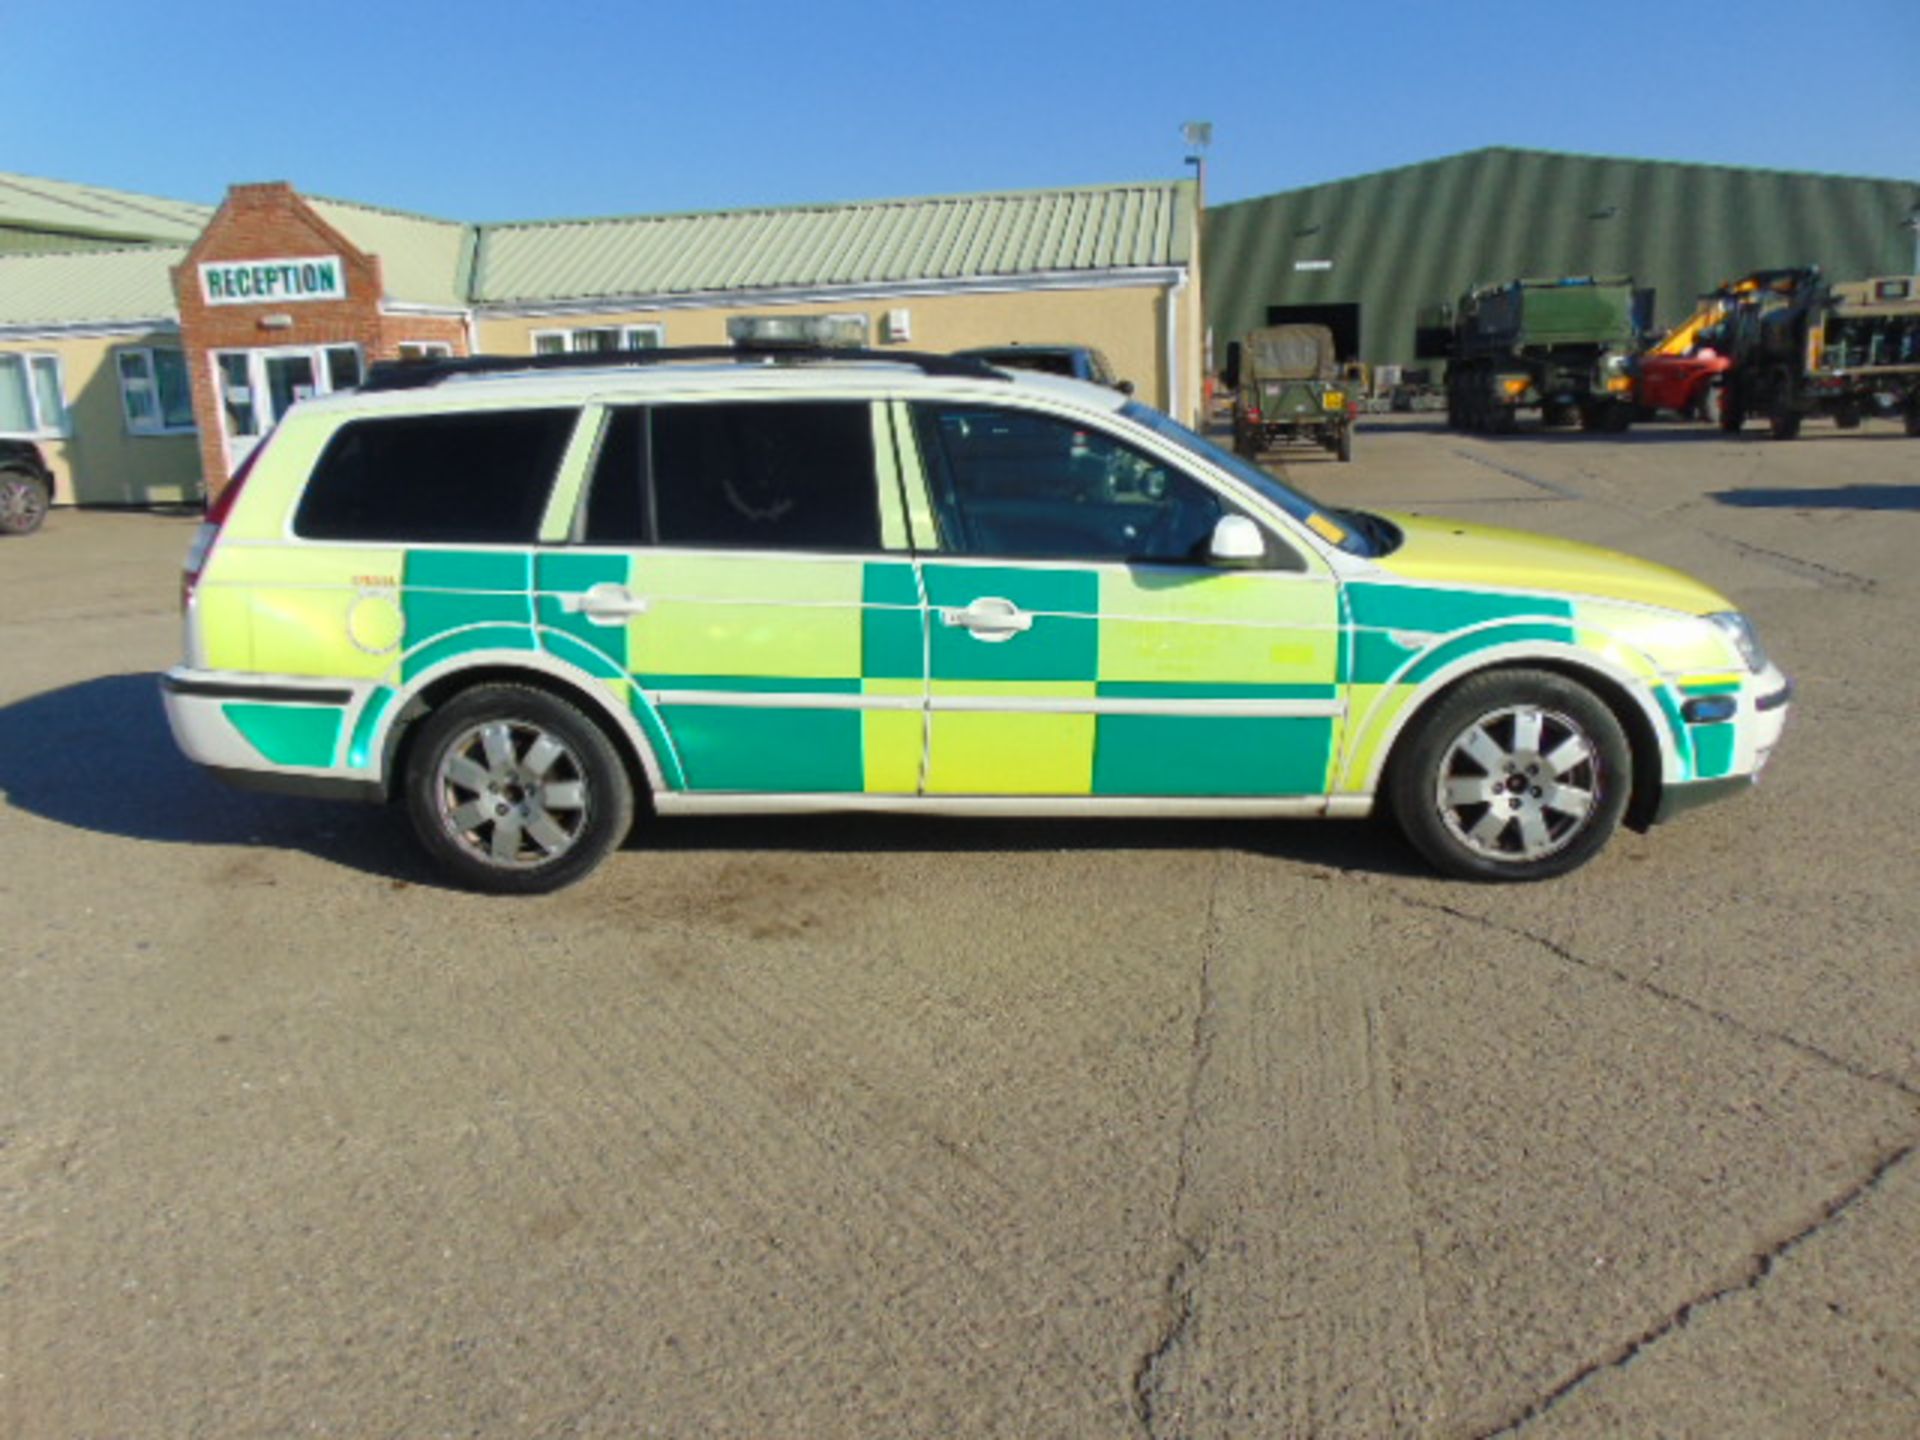 Ford Mondeo 2.0 Turbo diesel ambulance - Image 5 of 14